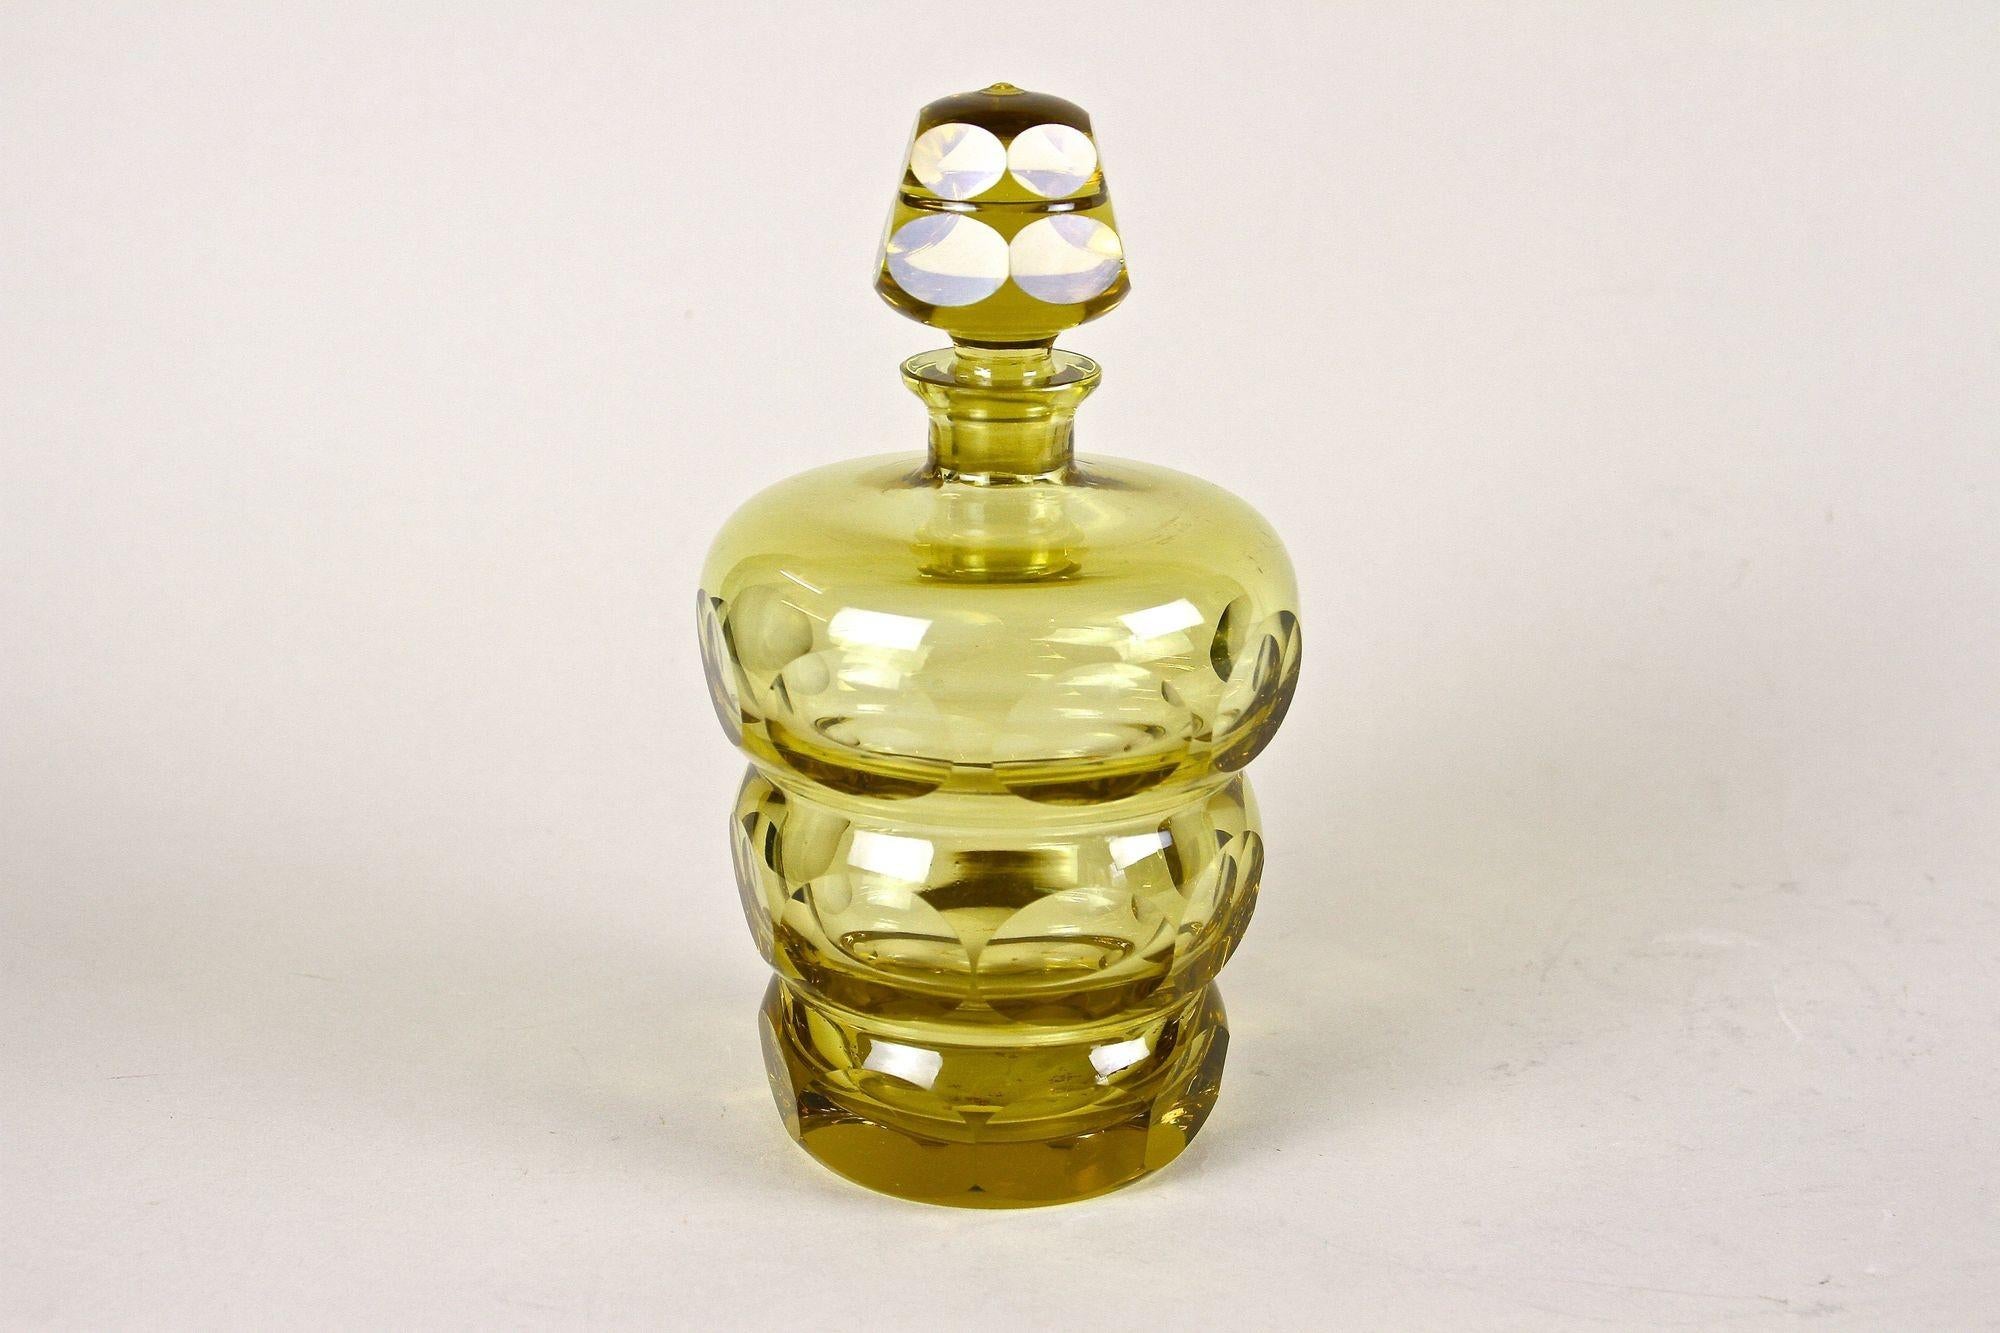 Extraordinary Art Deco cut glass/ liquor bottle from the early 20th century around 1930 in Bohemia. A very appealing designed glass bottle made of very thick unusual amber colored glass. The artfully round shaped body with three 